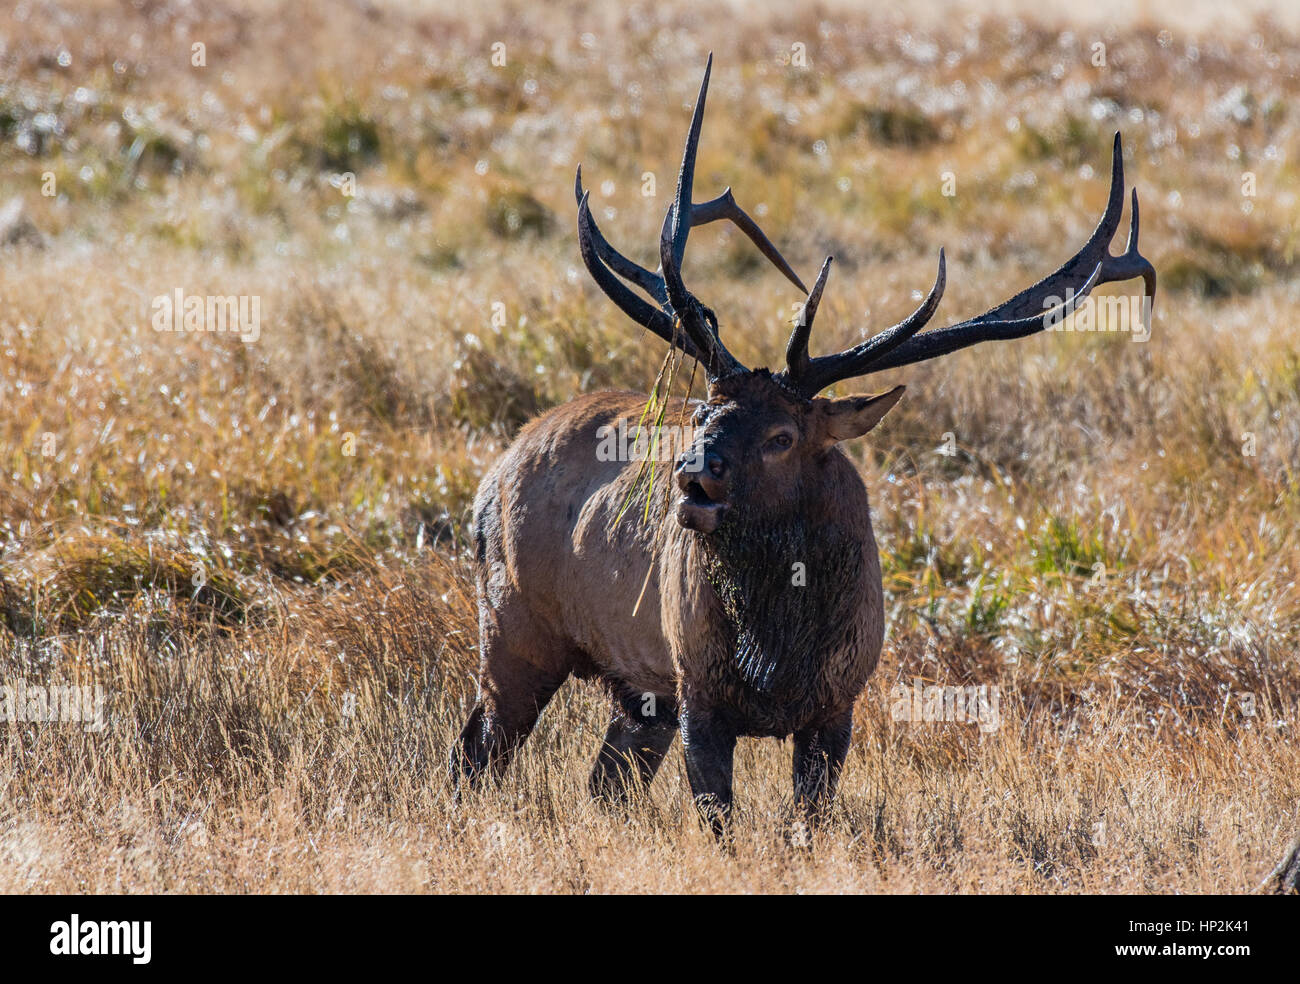 A Massive Bull Elk Bugling with Antler Decorations Stock Photo